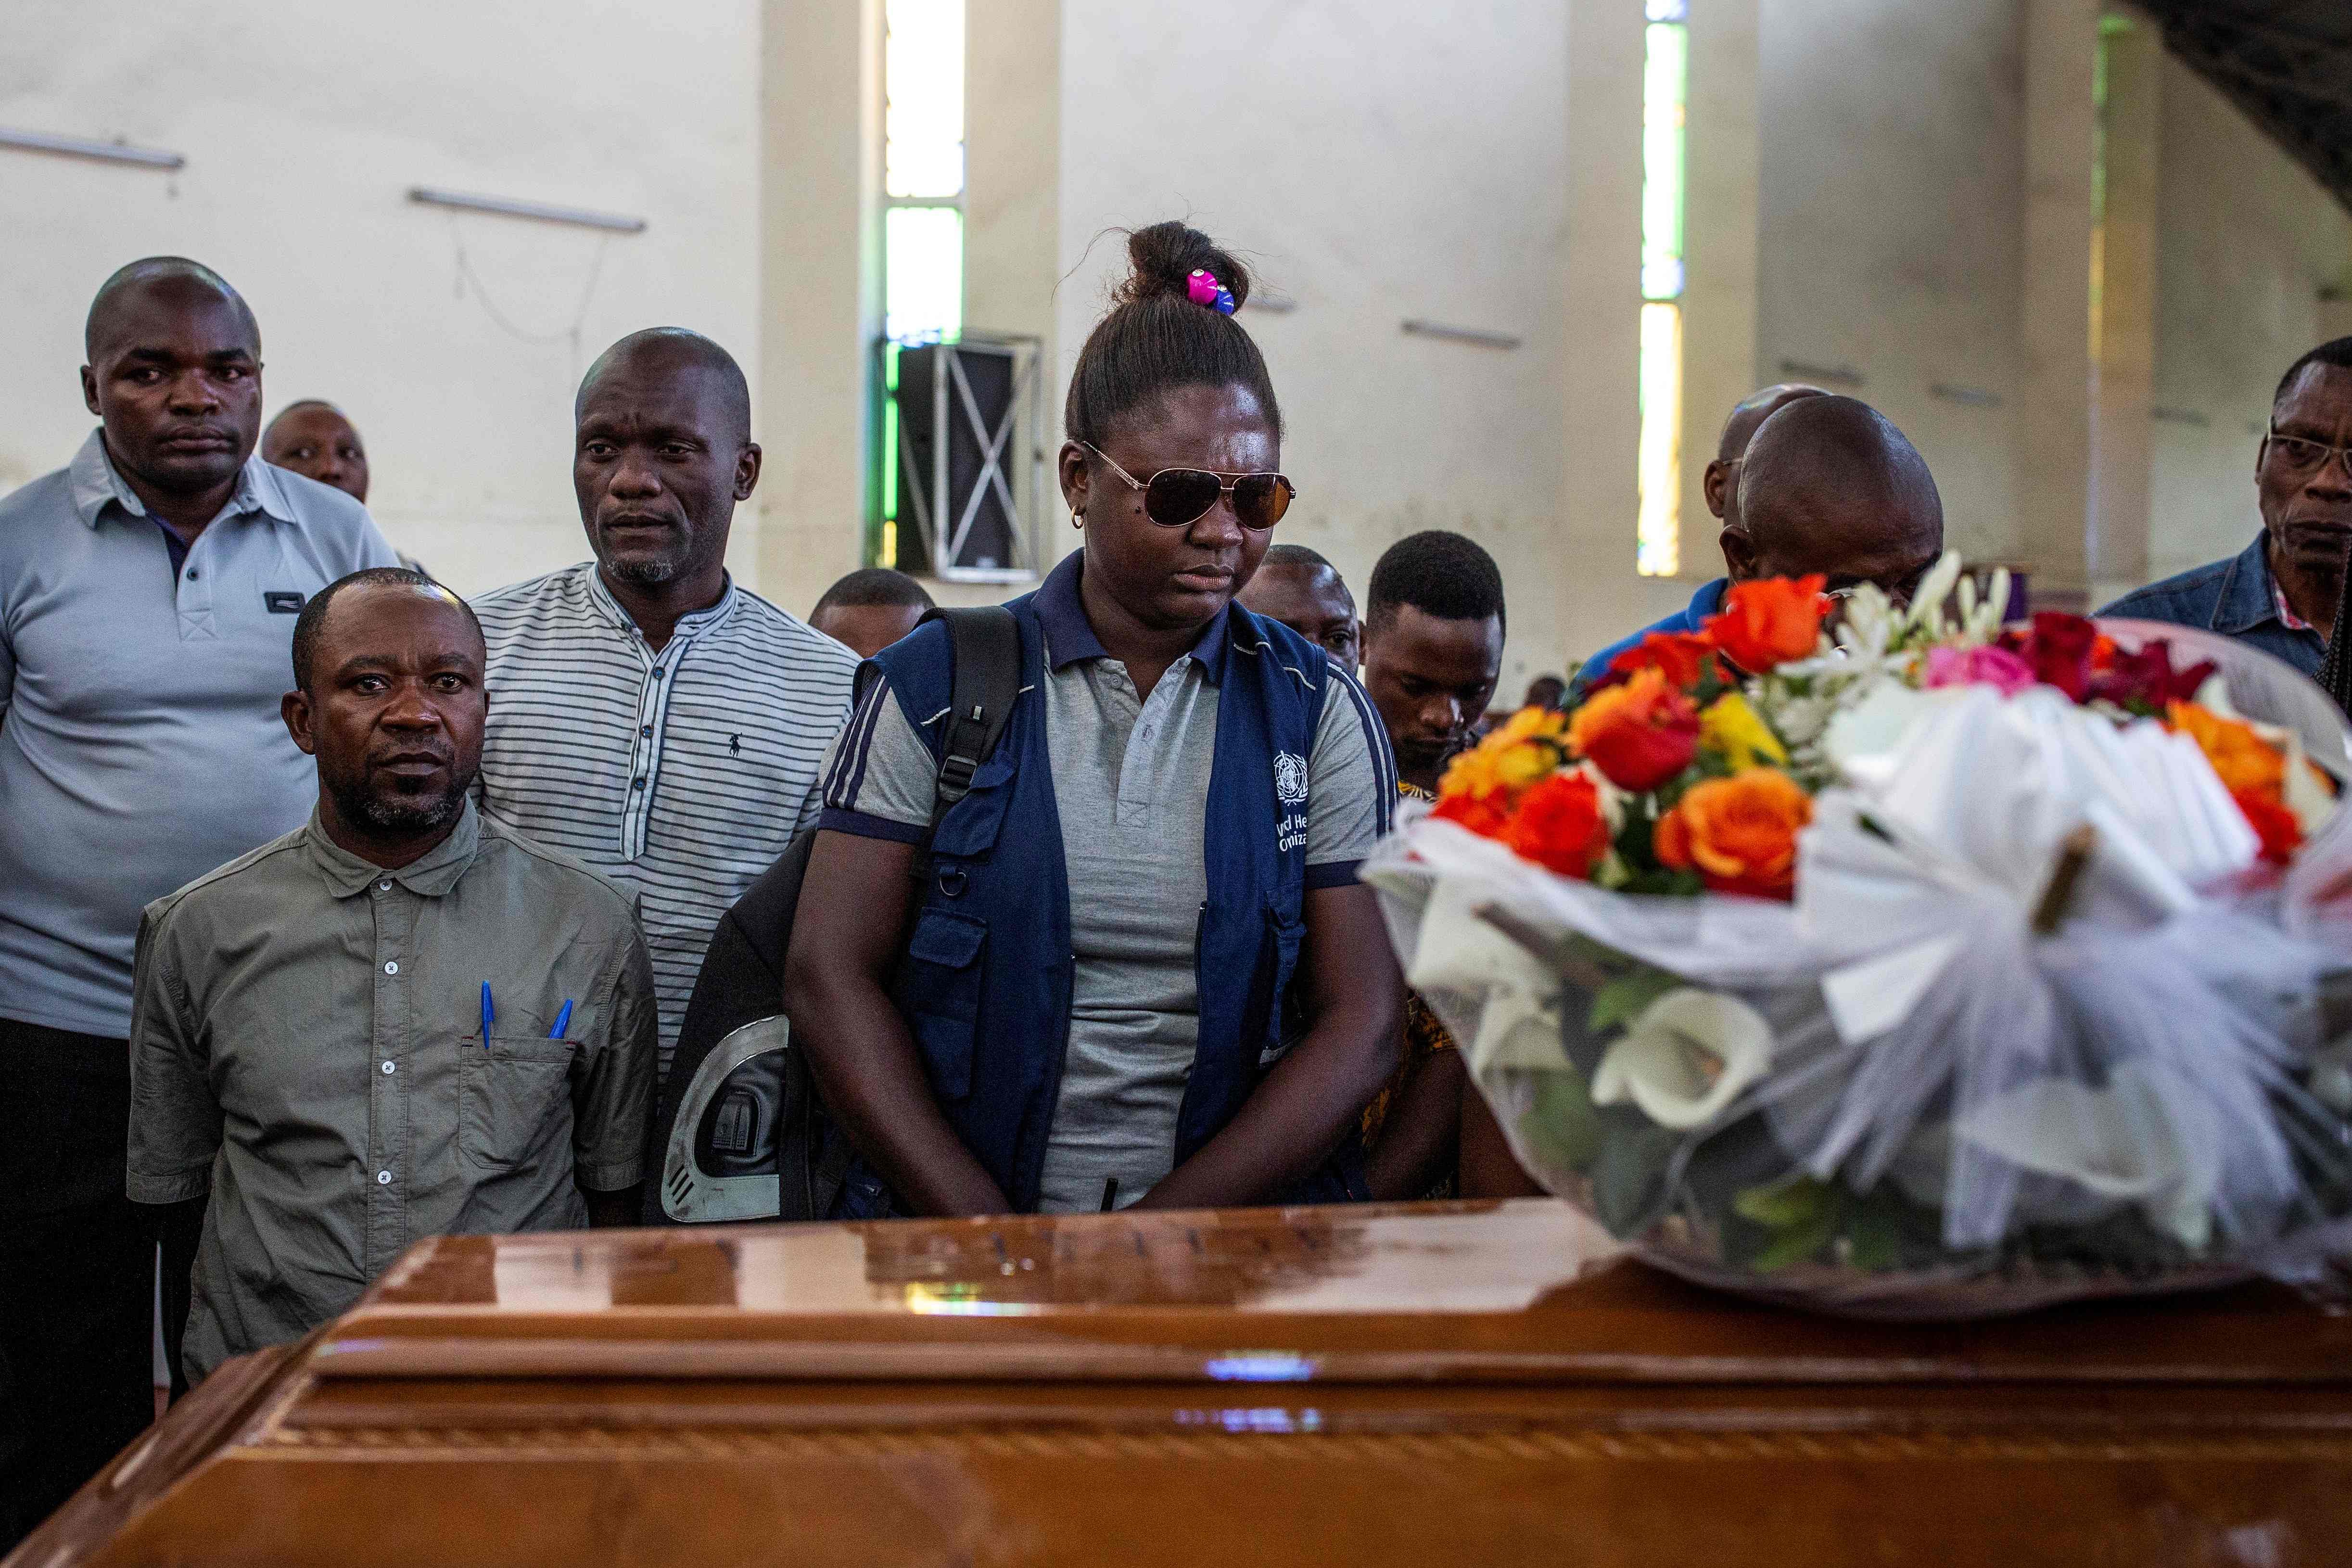 Family and colleagues of Belinda Kasongo, 30, who was part of the Ministry of Health vaccination team and was killed by armed men. (AFP Photo)